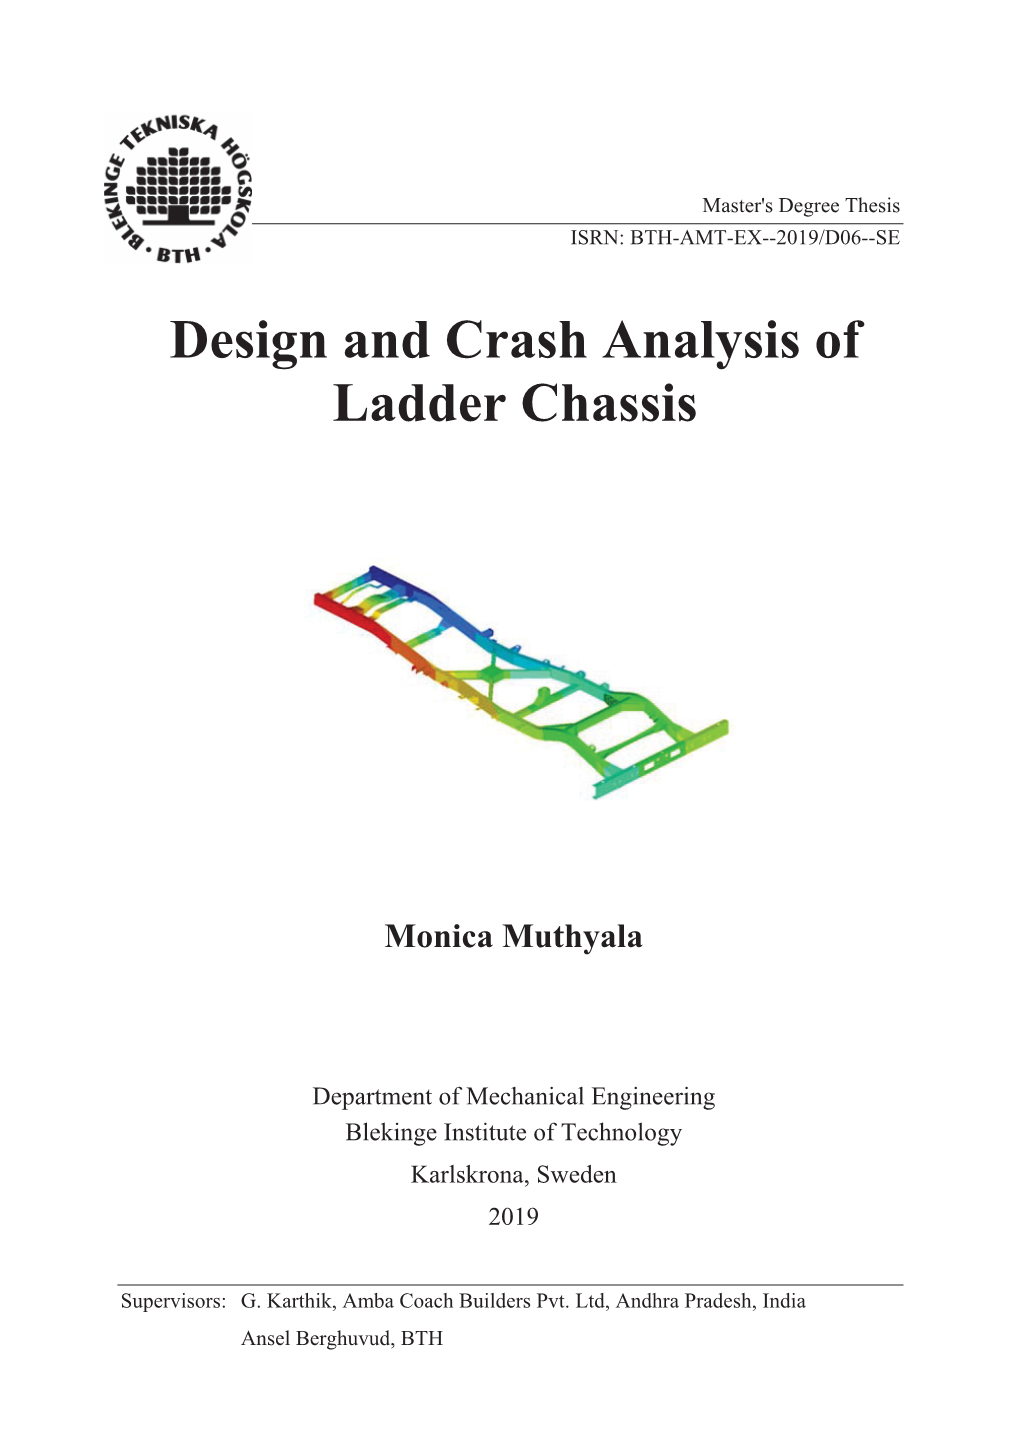 Design and Crash Analysis of Ladder Chassis